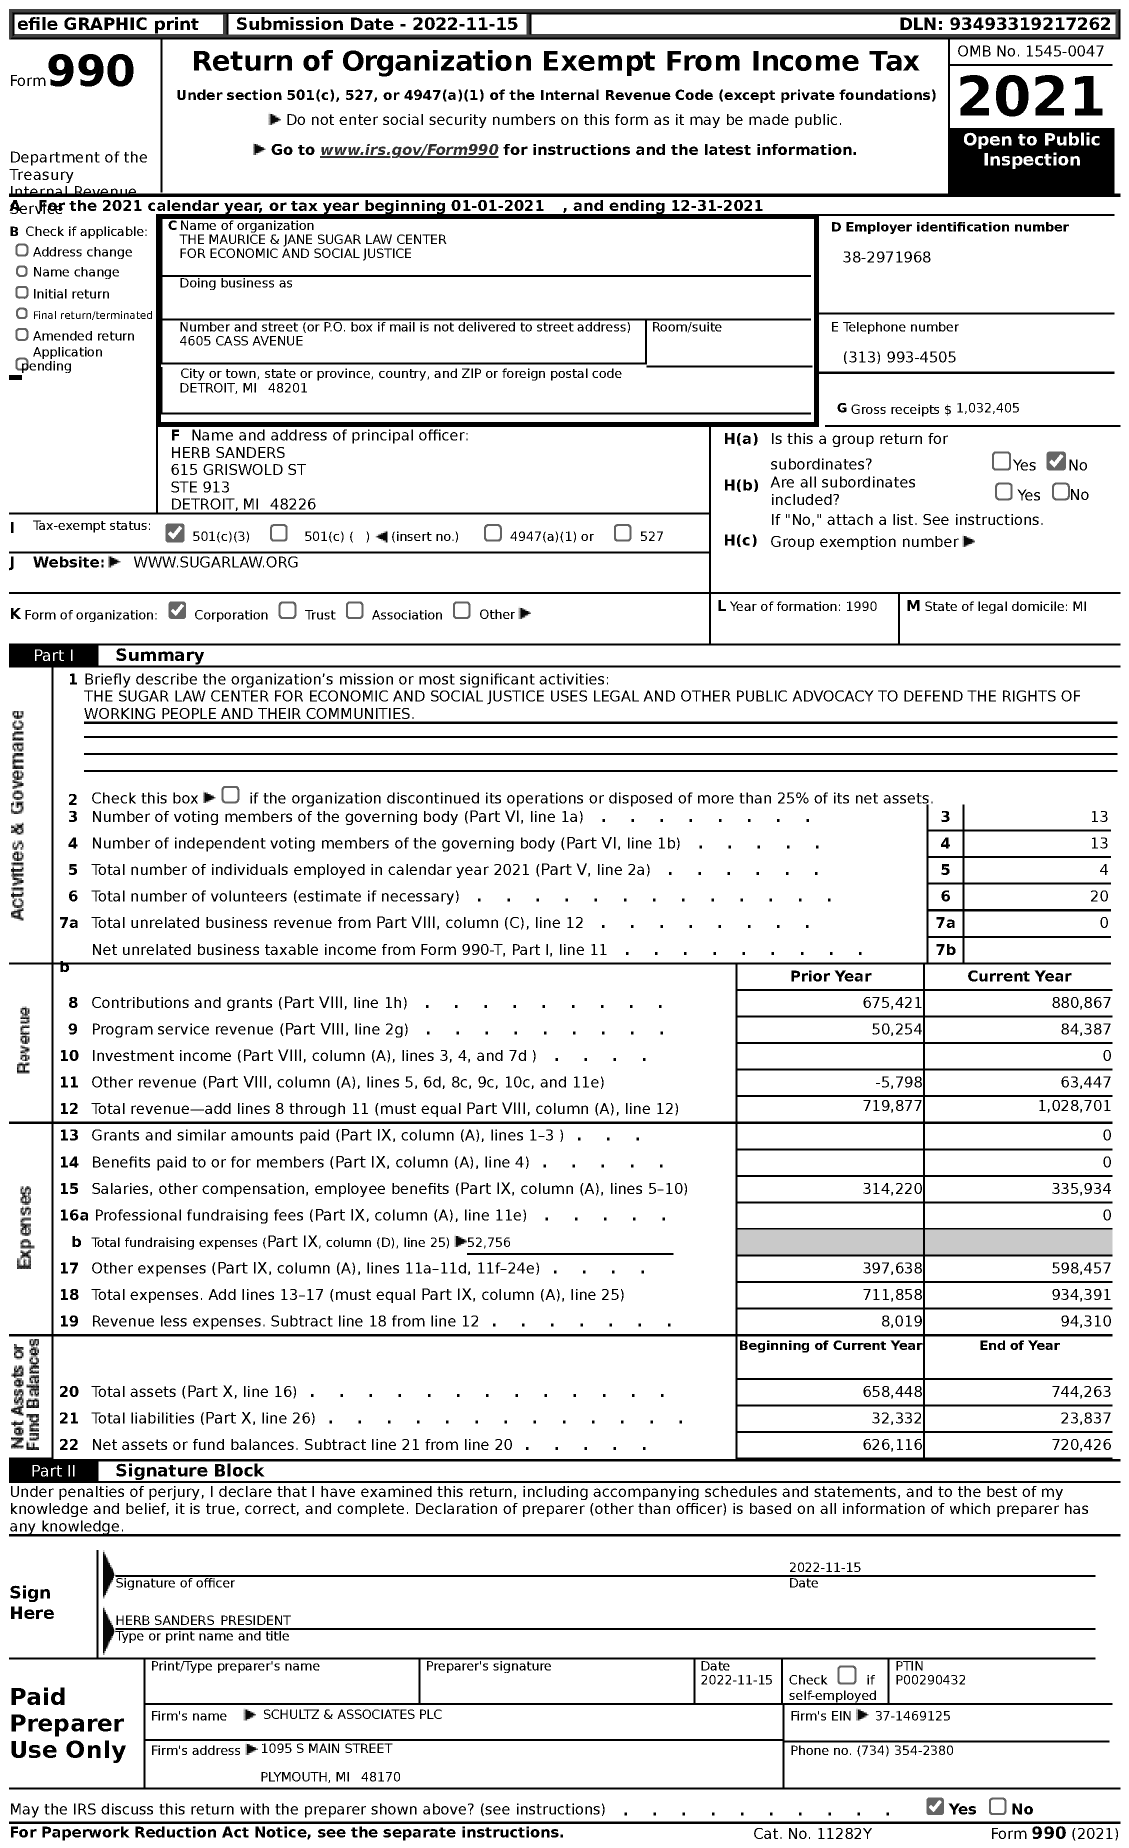 Image of first page of 2021 Form 990 for The Maurice and Jane Sugar Law Center for Economic and Social Justice